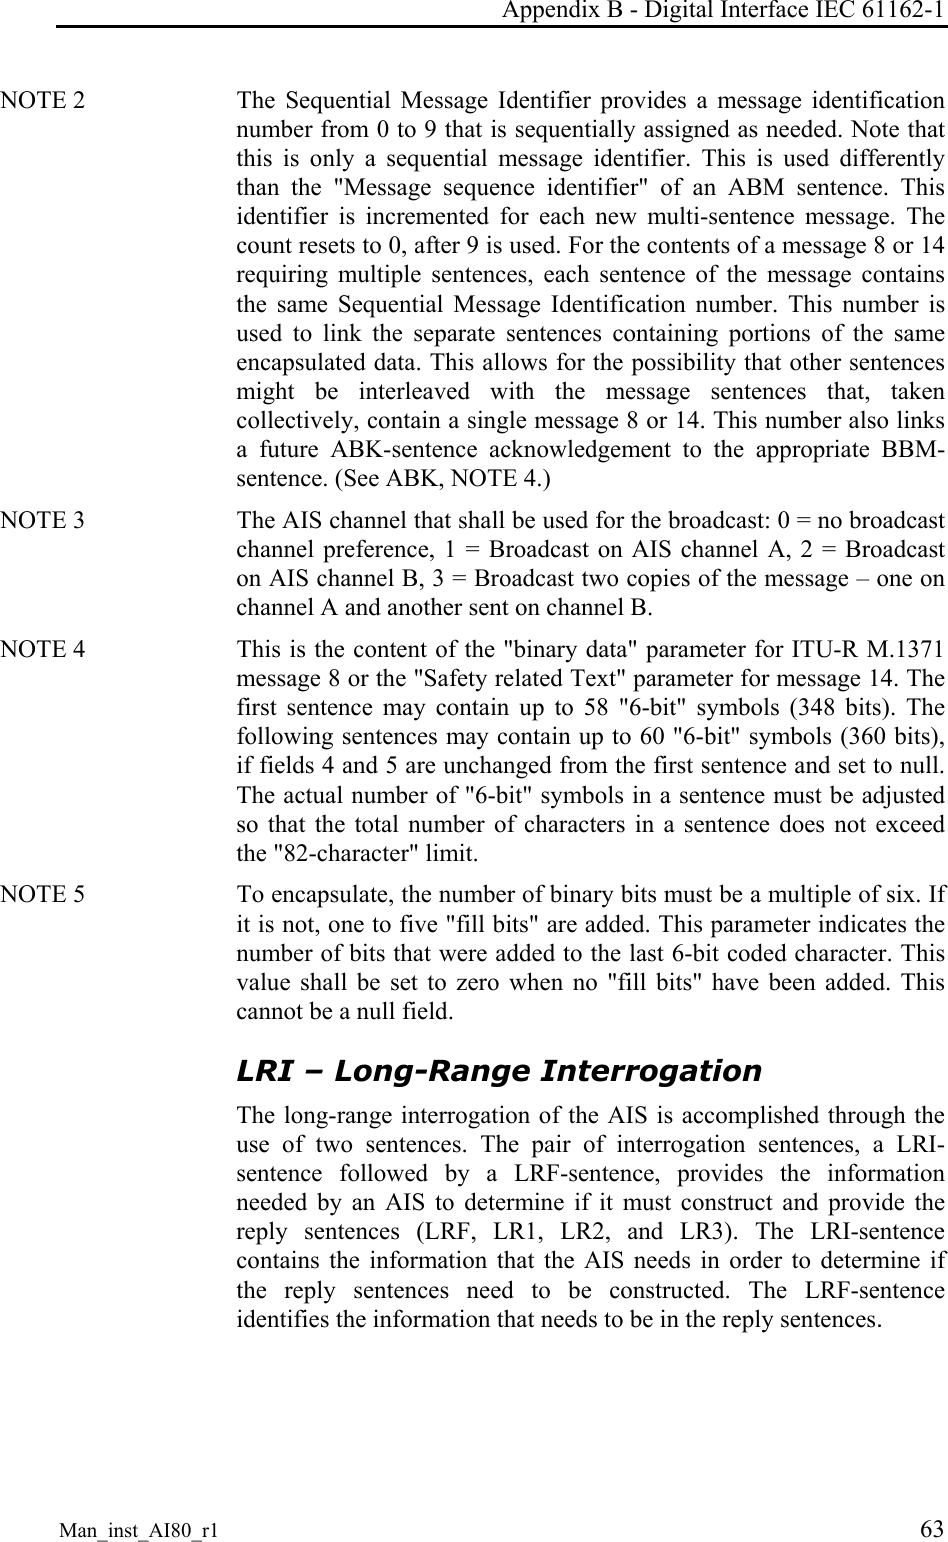 Appendix B - Digital Interface IEC 61162-1 Man_inst_AI80_r1 63 NOTE 2   The  Sequential  Message  Identifier provides a message identification number from 0 to 9 that is sequentially assigned as needed. Note that this is only a sequential message identifier. This is used differently than the &quot;Message sequence identifier&quot; of an ABM sentence. This identifier is incremented for each new multi-sentence message. The count resets to 0, after 9 is used. For the contents of a message 8 or 14 requiring multiple sentences, each sentence of the message contains the same Sequential Message Identification number. This number is used to link the separate sentences containing portions of the same encapsulated data. This allows for the possibility that other sentences might be interleaved with the message sentences that, taken collectively, contain a single message 8 or 14. This number also links a future ABK-sentence acknowledgement to the appropriate BBM-sentence. (See ABK, NOTE 4.) NOTE 3   The AIS channel that shall be used for the broadcast: 0 = no broadcast channel preference, 1 = Broadcast on AIS channel A, 2 = Broadcast on AIS channel B, 3 = Broadcast two copies of the message – one on channel A and another sent on channel B. NOTE 4   This is the content of the &quot;binary data&quot; parameter for ITU-R M.1371 message 8 or the &quot;Safety related Text&quot; parameter for message 14. The first sentence may contain up to 58 &quot;6-bit&quot; symbols (348 bits). The following sentences may contain up to 60 &quot;6-bit&quot; symbols (360 bits), if fields 4 and 5 are unchanged from the first sentence and set to null. The actual number of &quot;6-bit&quot; symbols in a sentence must be adjusted so that the total number of characters in a sentence does not exceed the &quot;82-character&quot; limit. NOTE 5   To encapsulate, the number of binary bits must be a multiple of six. If it is not, one to five &quot;fill bits&quot; are added. This parameter indicates the number of bits that were added to the last 6-bit coded character. This value shall be set to zero when no &quot;fill bits&quot; have been added. This cannot be a null field. LRI – Long-Range Interrogation The long-range interrogation of the AIS is accomplished through the use of two sentences. The pair of interrogation sentences, a LRI-sentence followed by a LRF-sentence, provides the information needed by an AIS to determine if it must construct and provide the reply sentences (LRF, LR1, LR2, and LR3). The LRI-sentence contains the information that the AIS needs in order to determine if the reply sentences need to be constructed. The LRF-sentence identifies the information that needs to be in the reply sentences. 